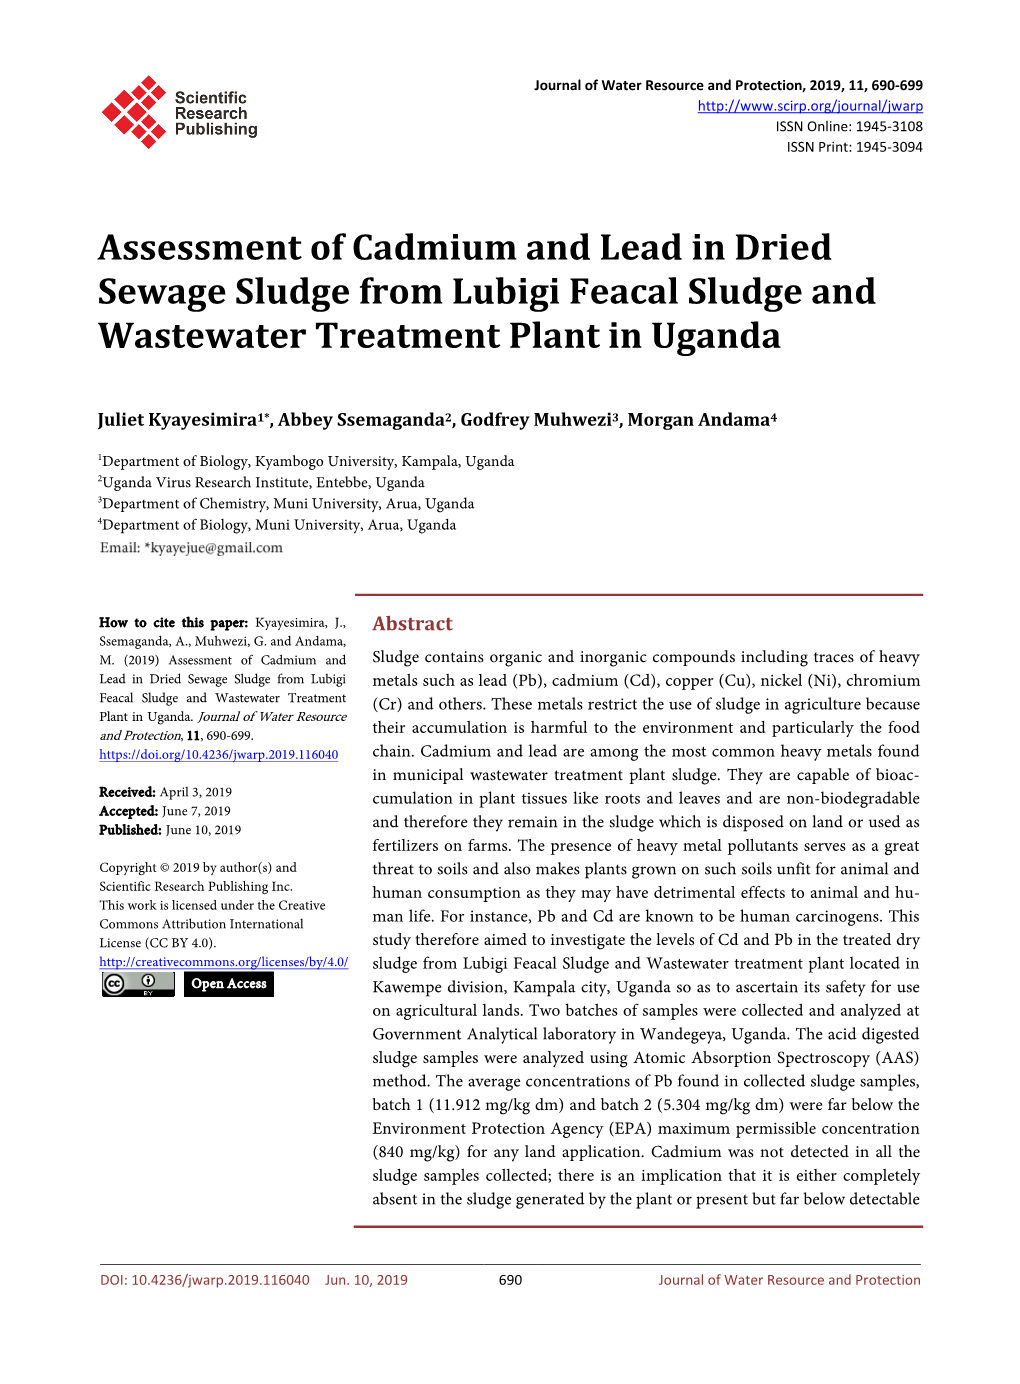 Assessment of Cadmium and Lead in Dried Sewage Sludge from Lubigi Feacal Sludge and Wastewater Treatment Plant in Uganda